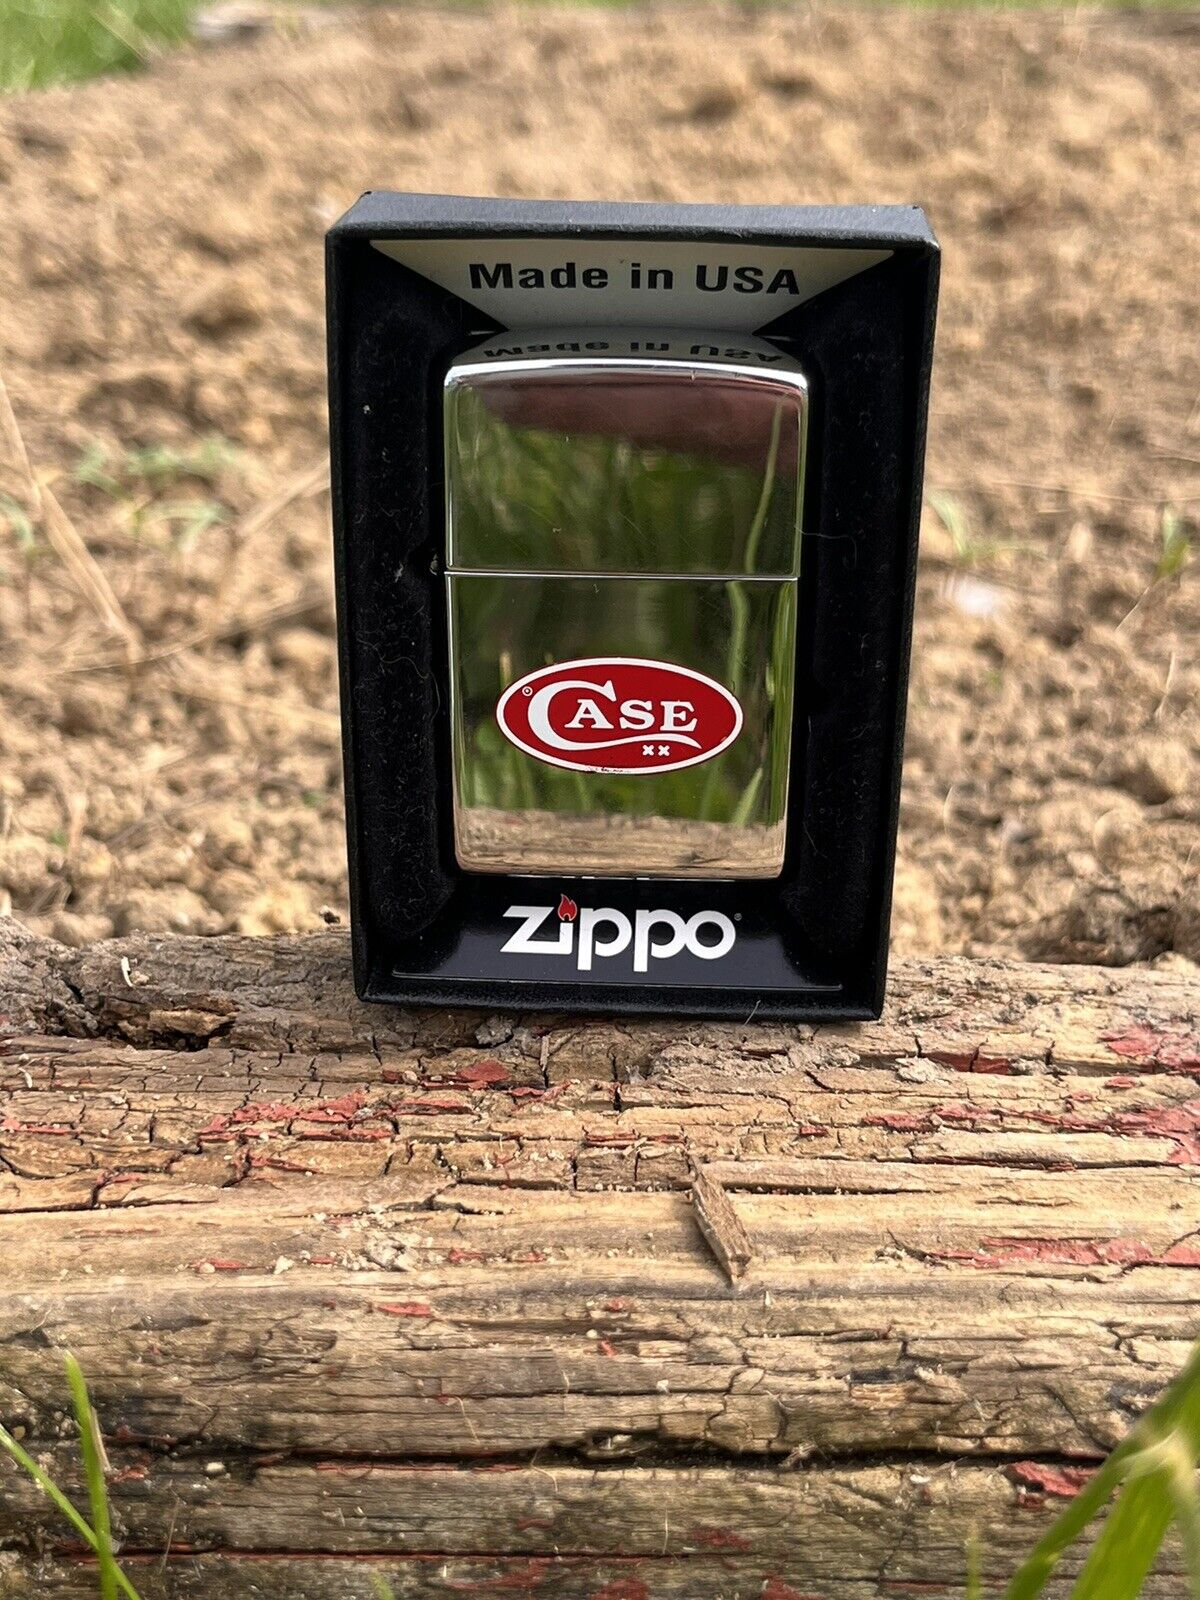 Case xx Zippo 1996 Lighter Only. Box Not Included. Very Clean,